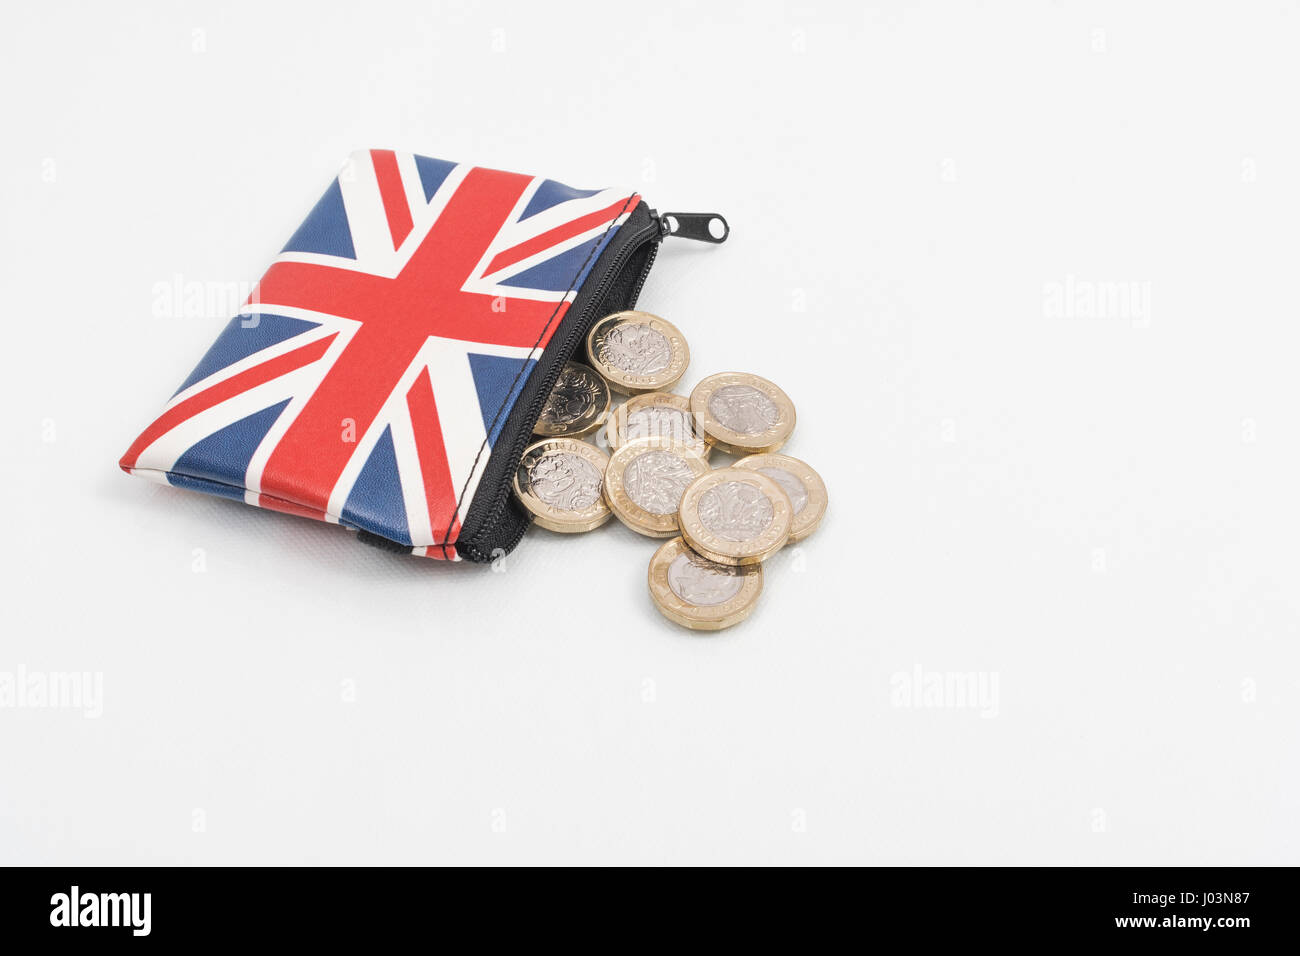 New UK £1 / One pound coins with a Union Jack coin purse on a plain background. Metaphor for 'rising cost of living', affordability, spendthrift 30s. Stock Photo